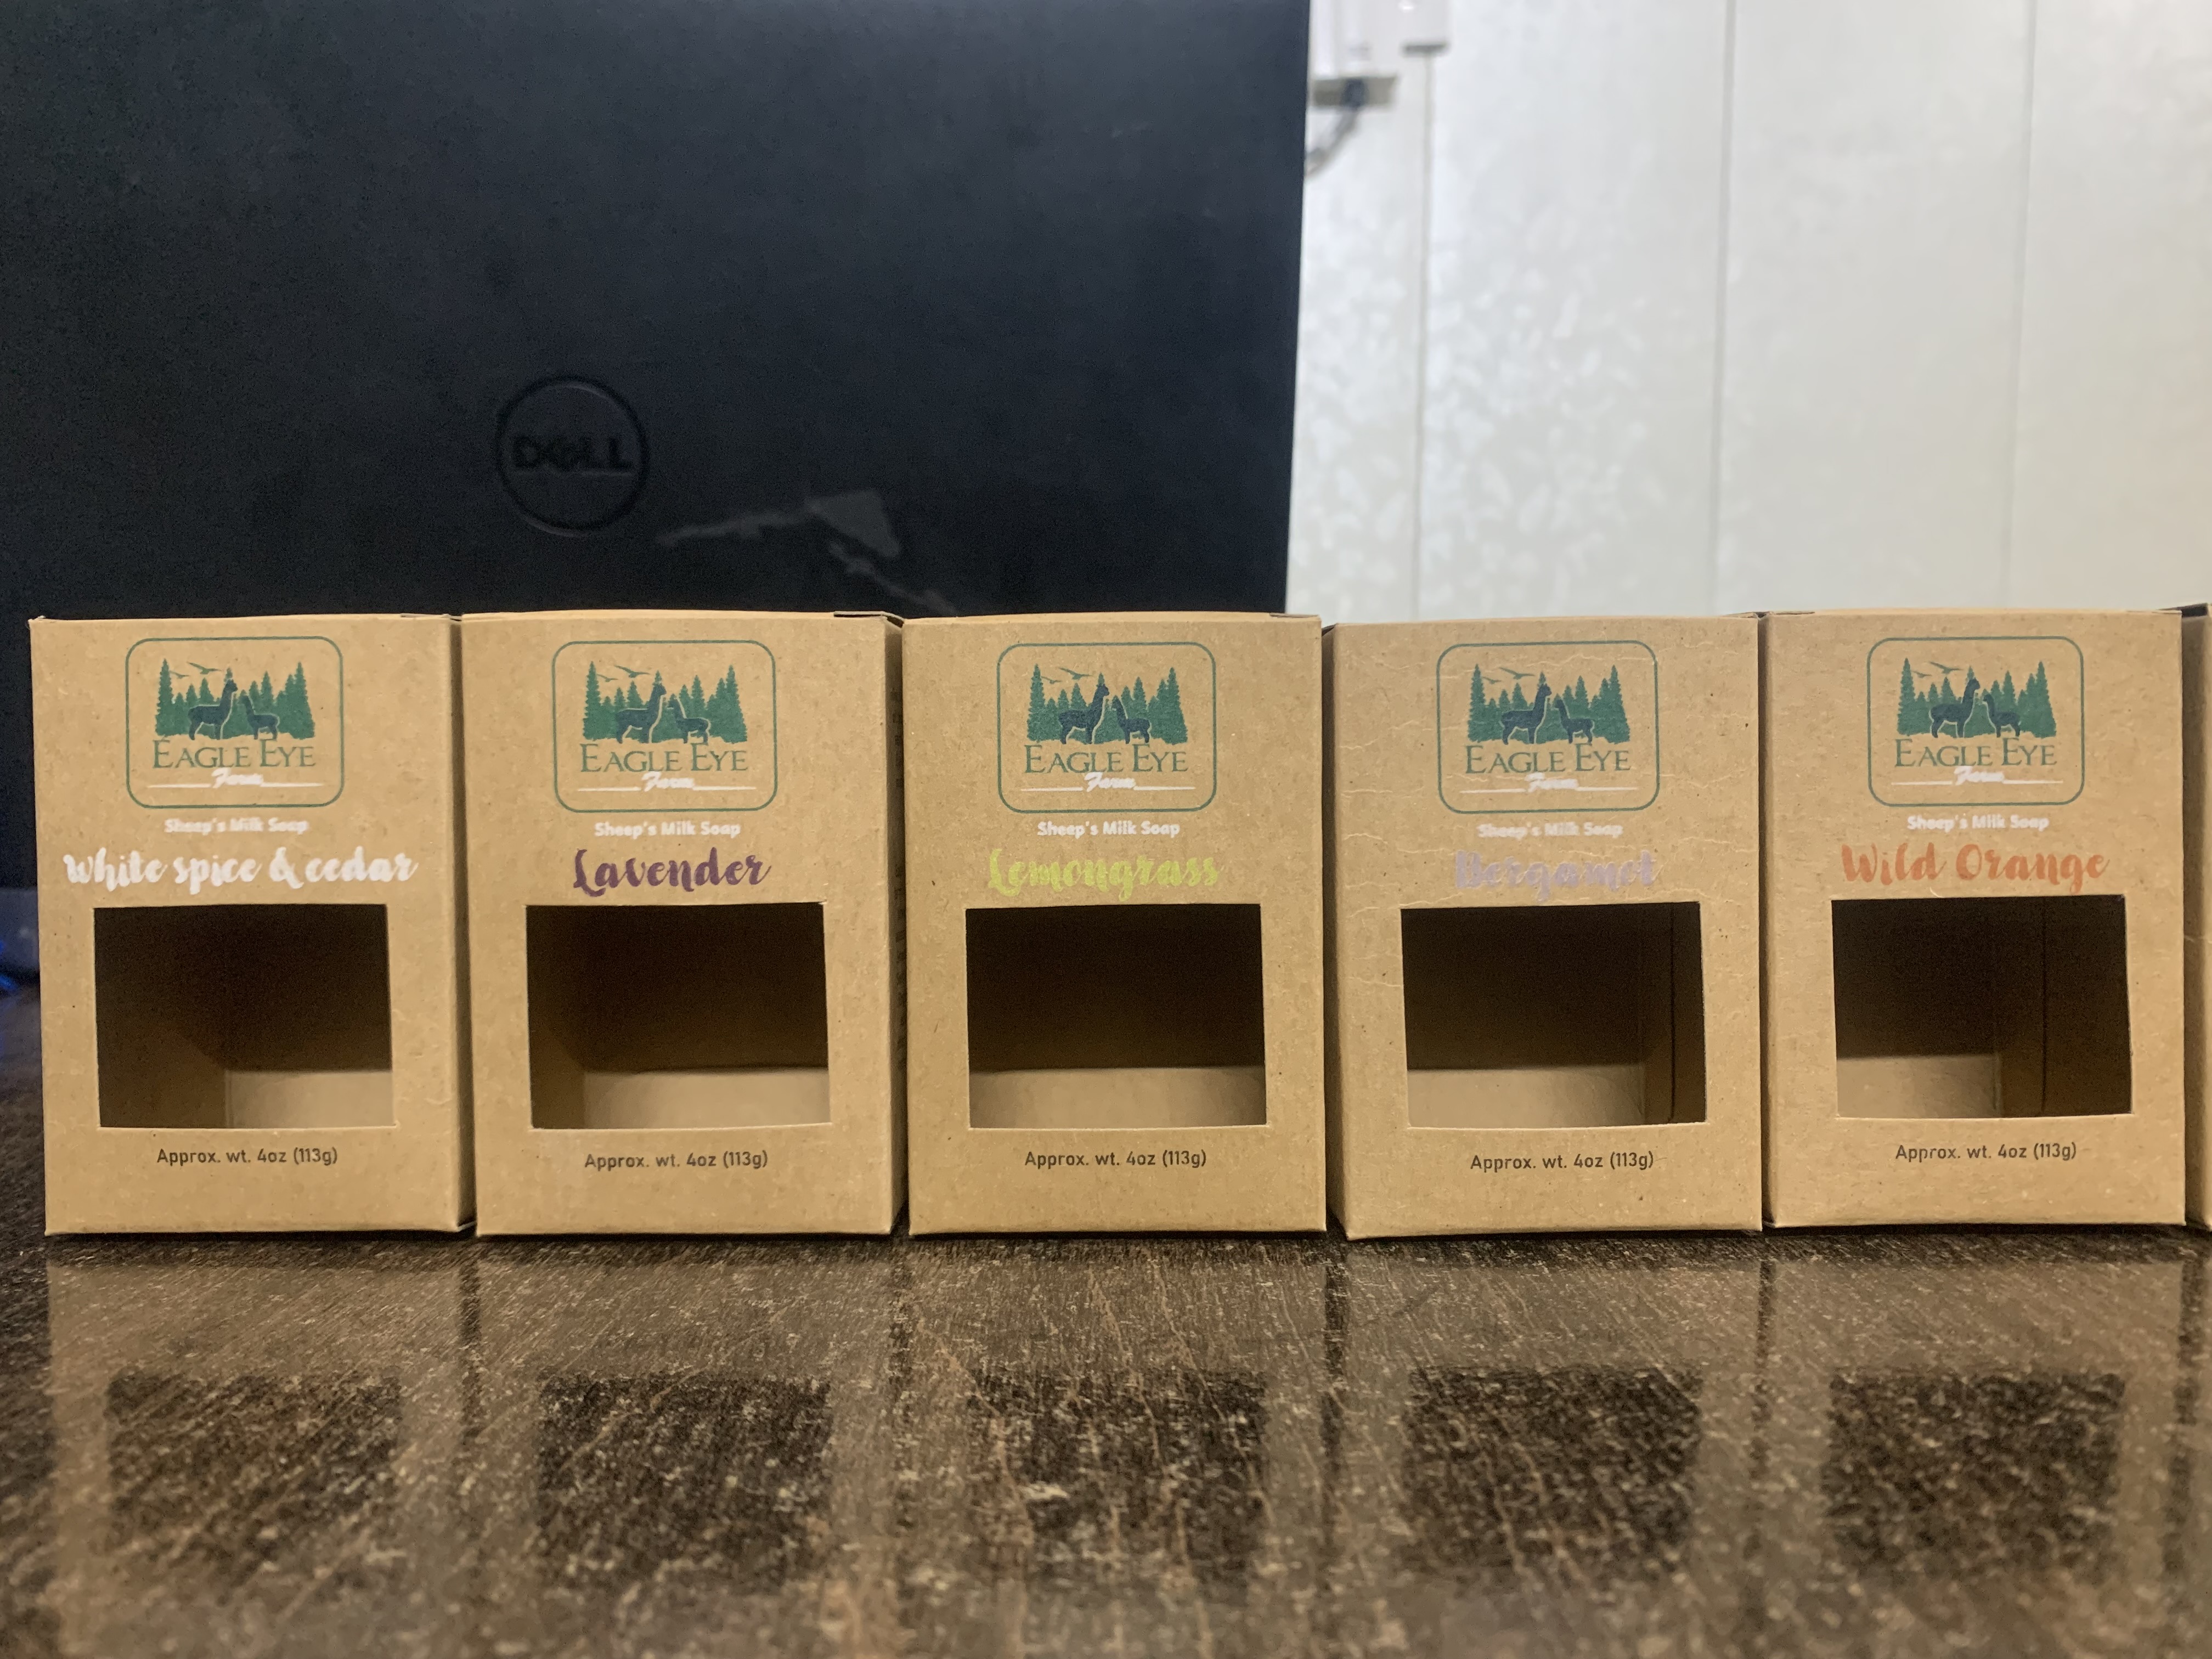 Ways To Make Your Kraft Paper Soap Packaging Durable Than Ever | SirePrinting